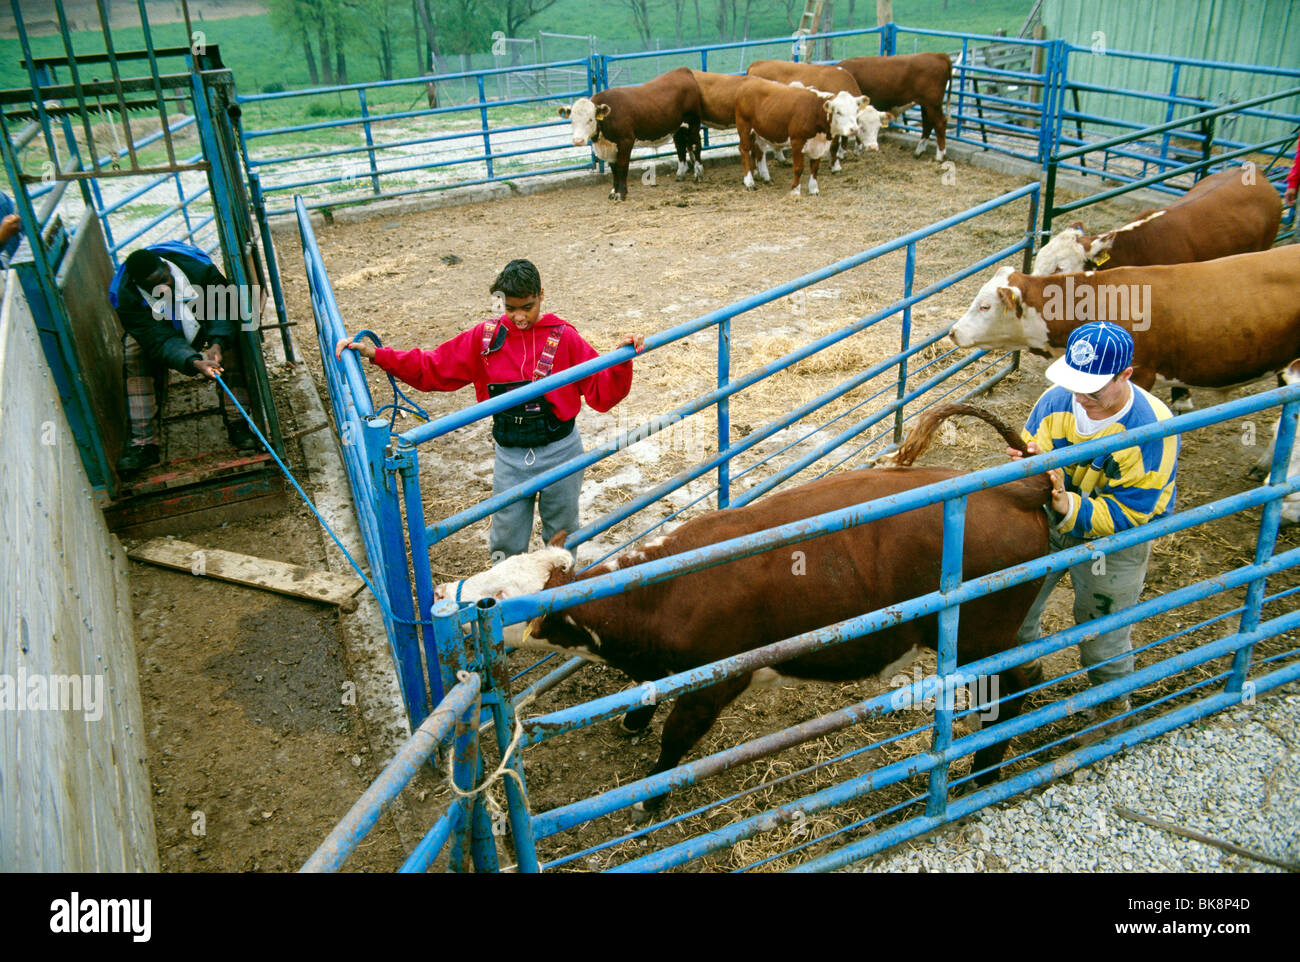 High school students in a barnyard corral with cattle, Saul School of Agricultural Science, Philadelphia, Pennsylvania, USA Stock Photo